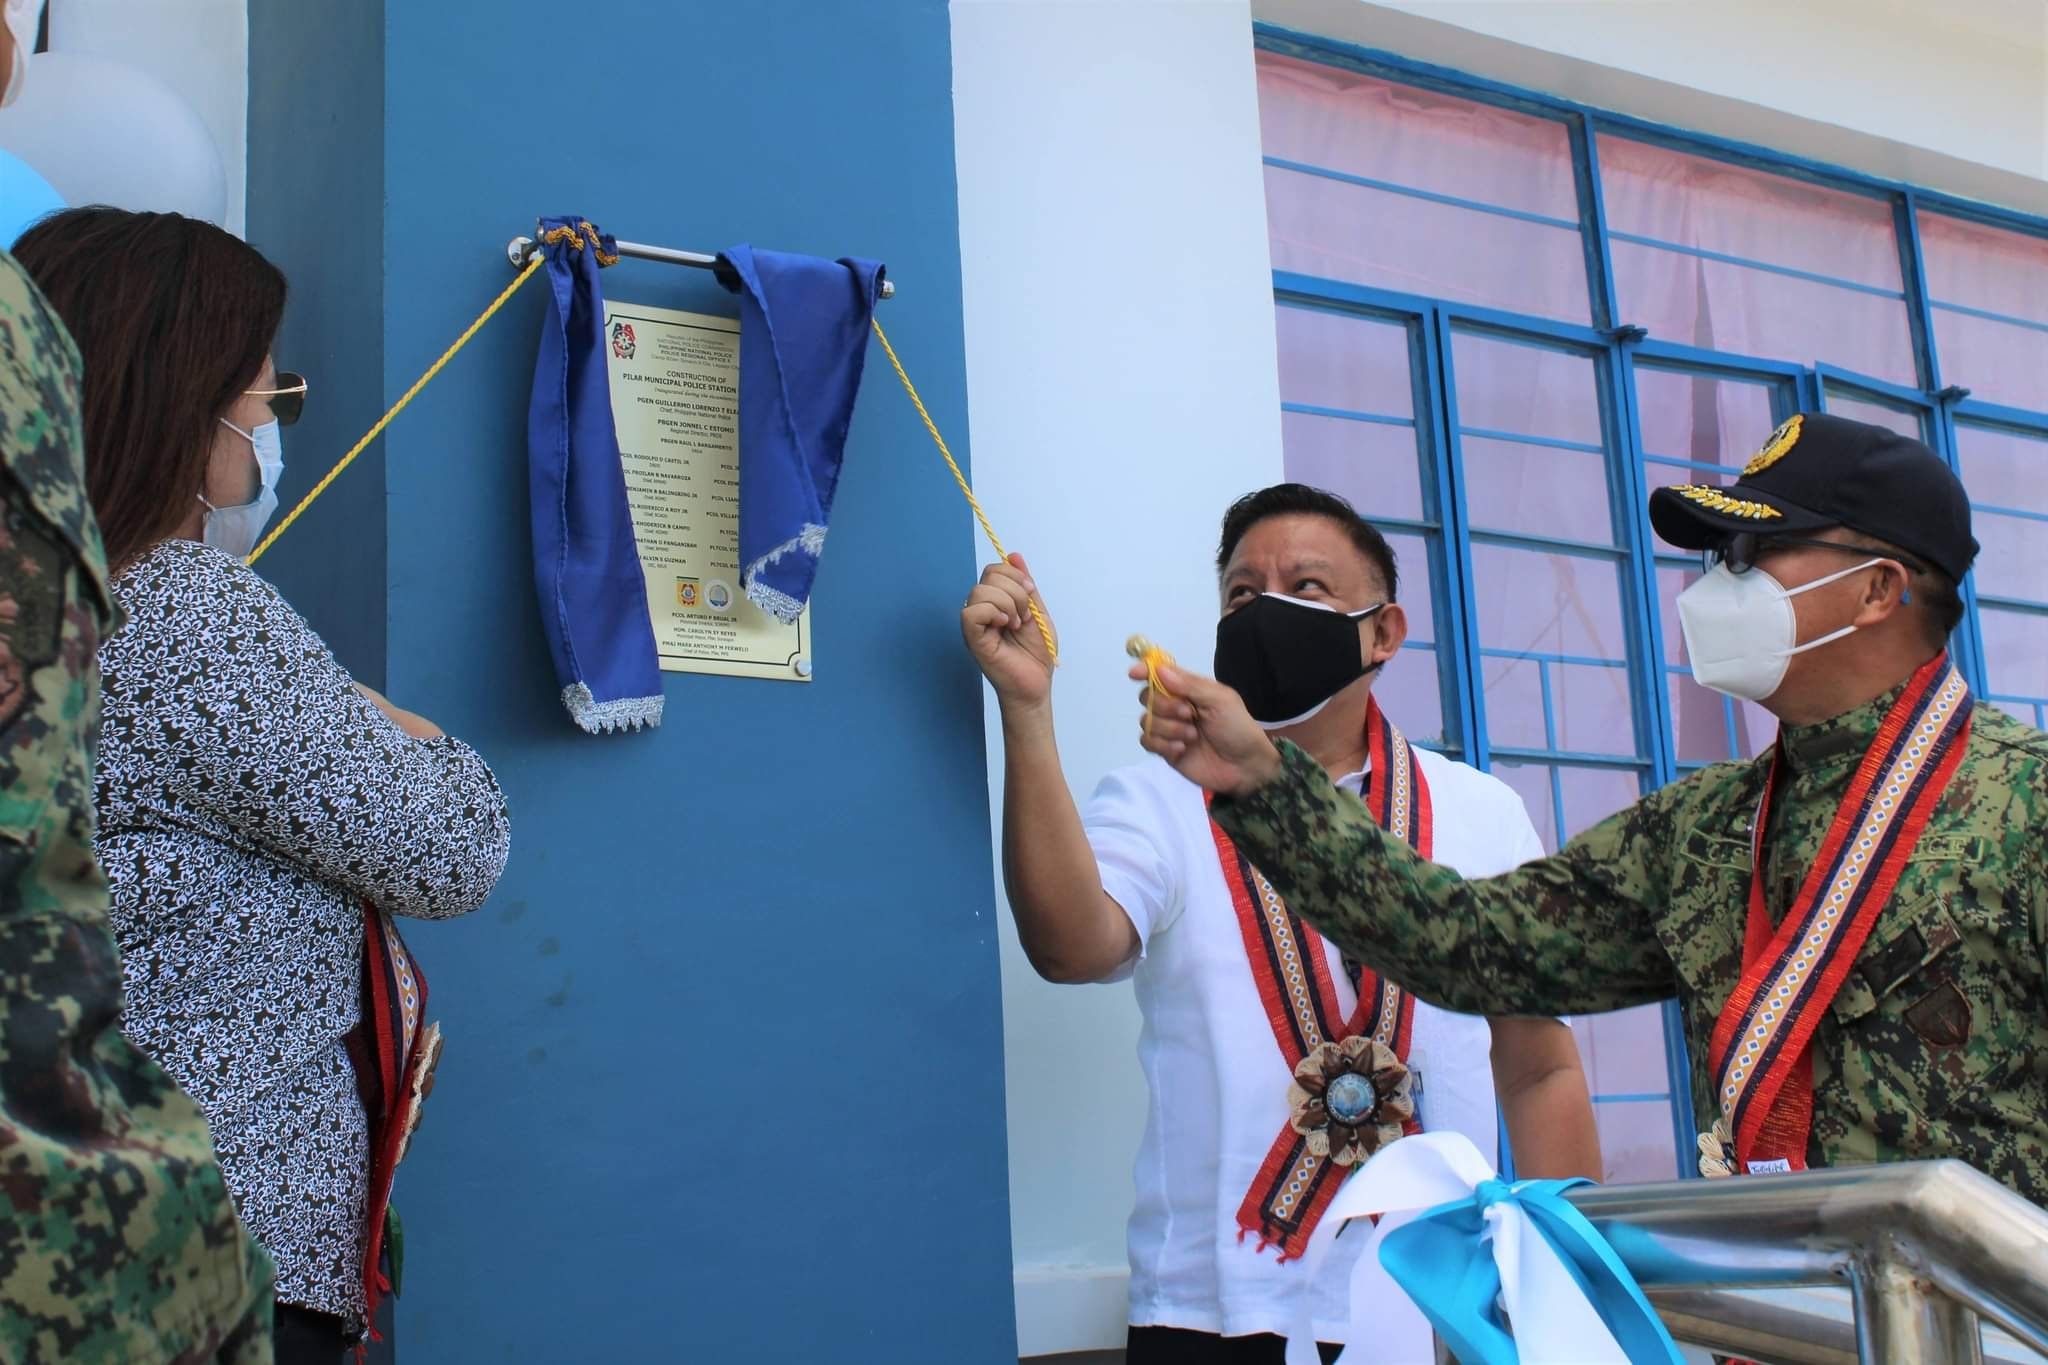 LGU Pilar partakes in the Inauguration and Blessing of Pilar MPS new building